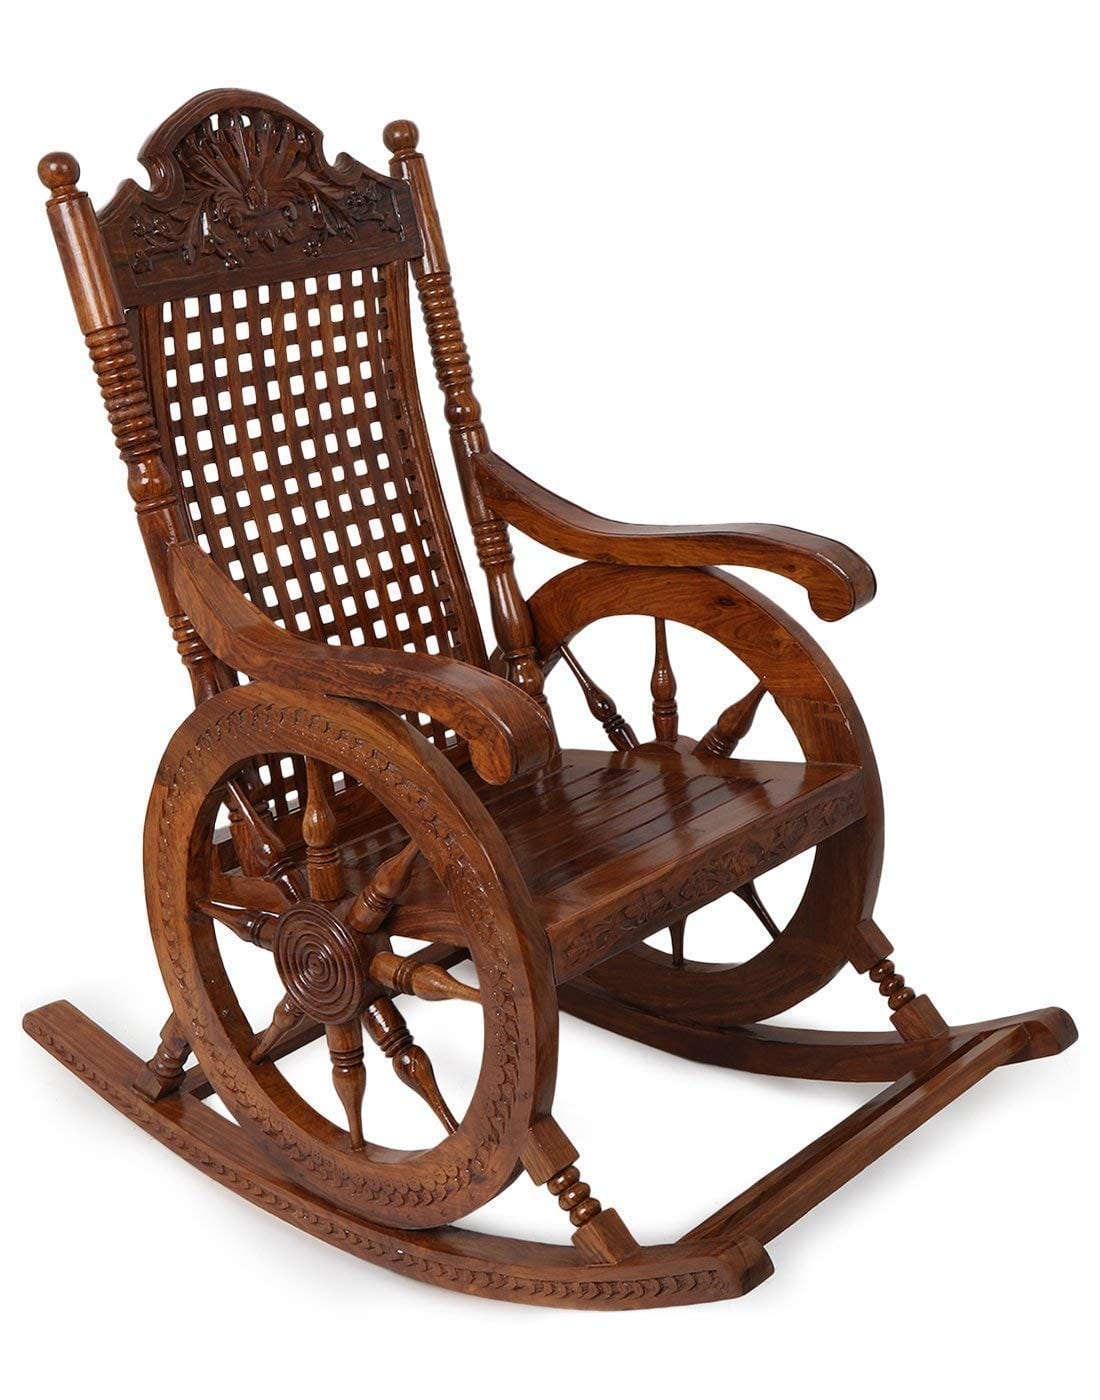 Wooden Rocking Chair Resting Chair Grandpa Rocking Chair Made Of High Quality Wood